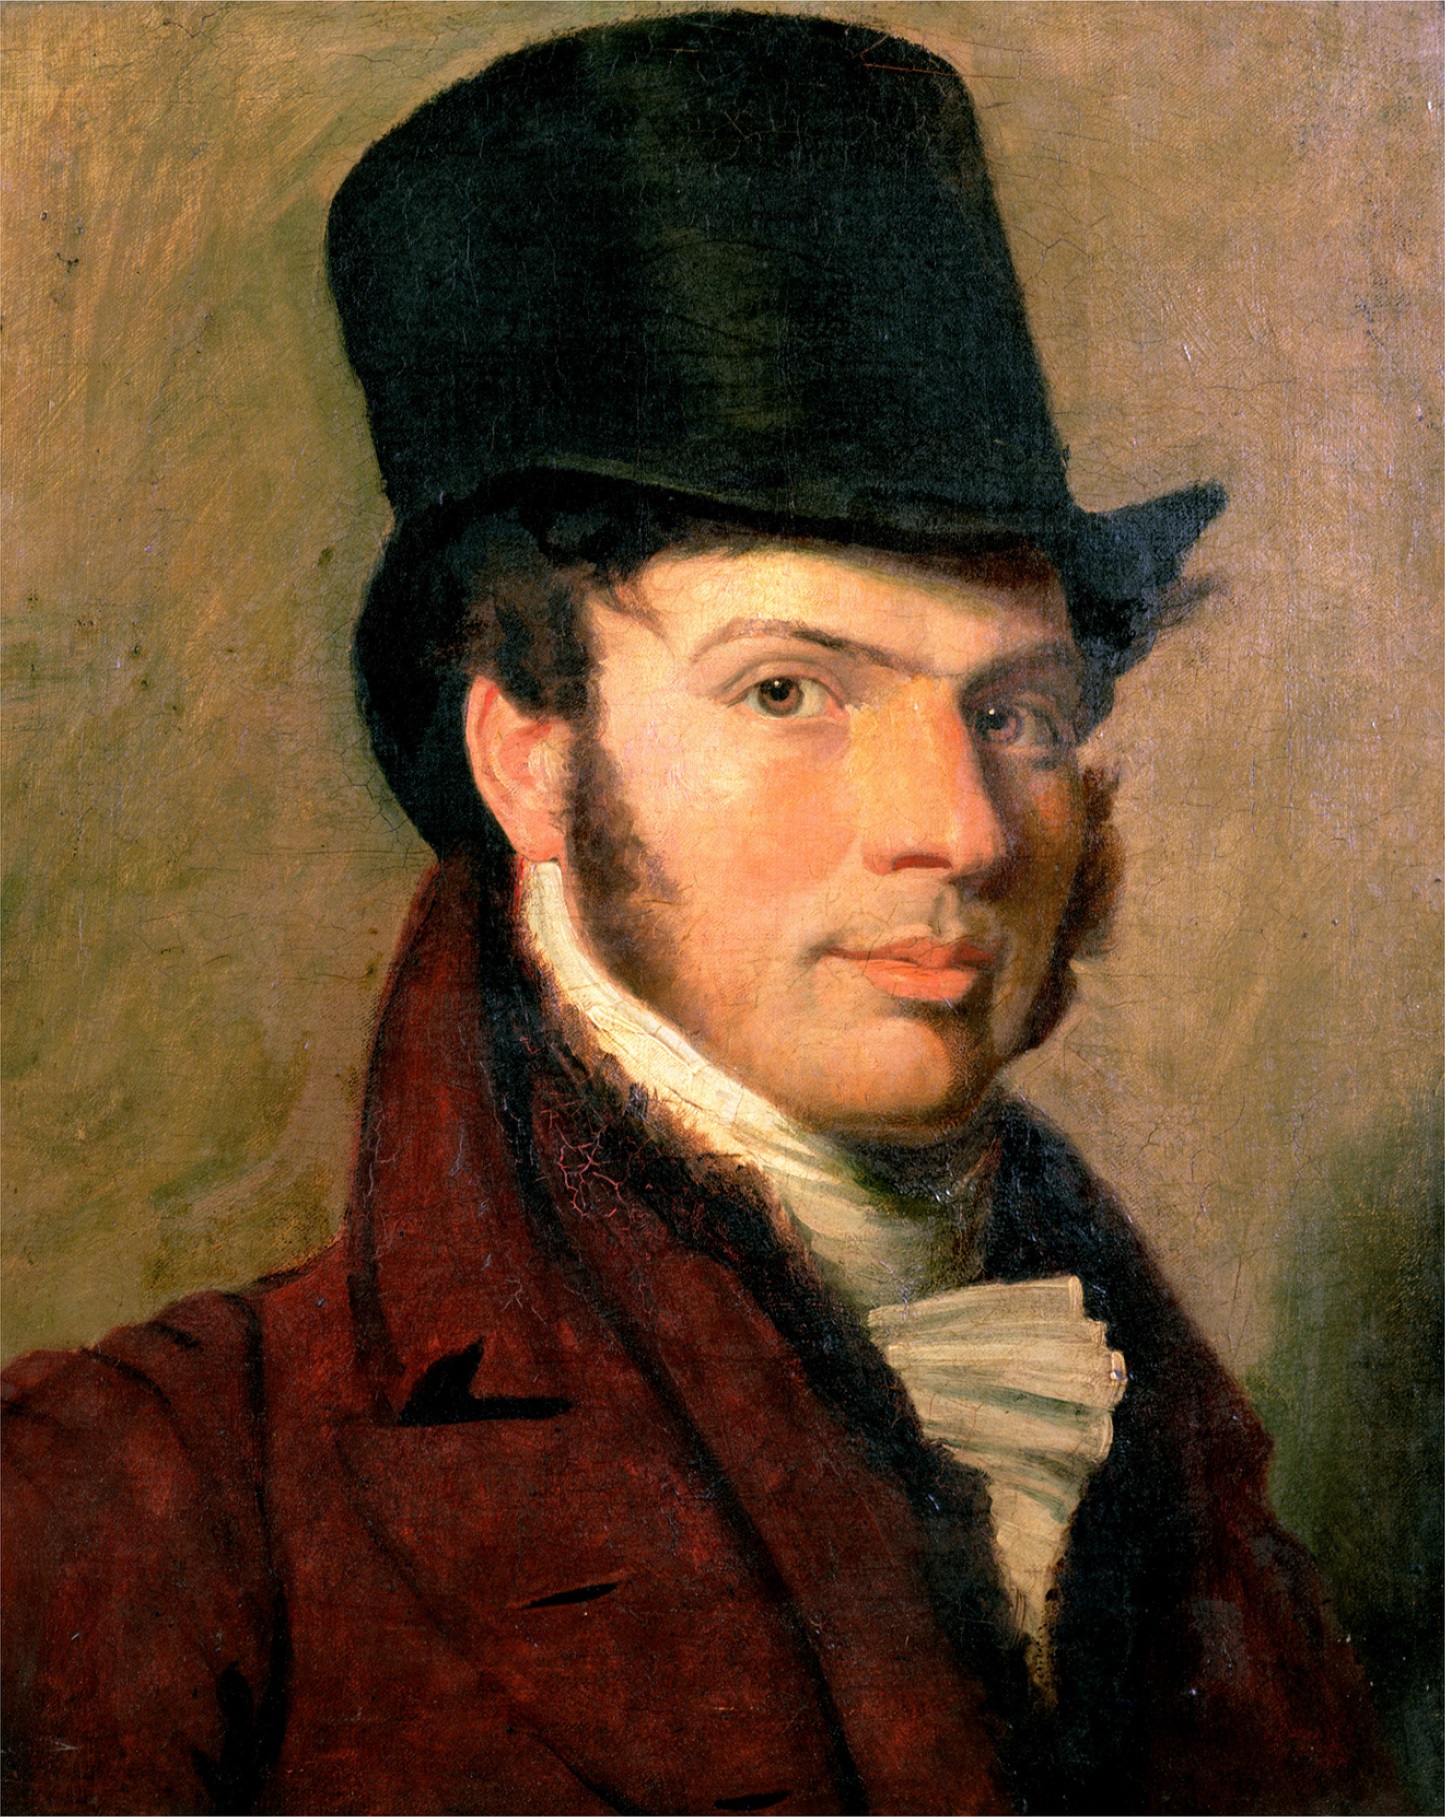 Agasse,_Jacques-Laurent_-_Portrait_of_a_Young_Man_in_a_Top_Hat.jpg